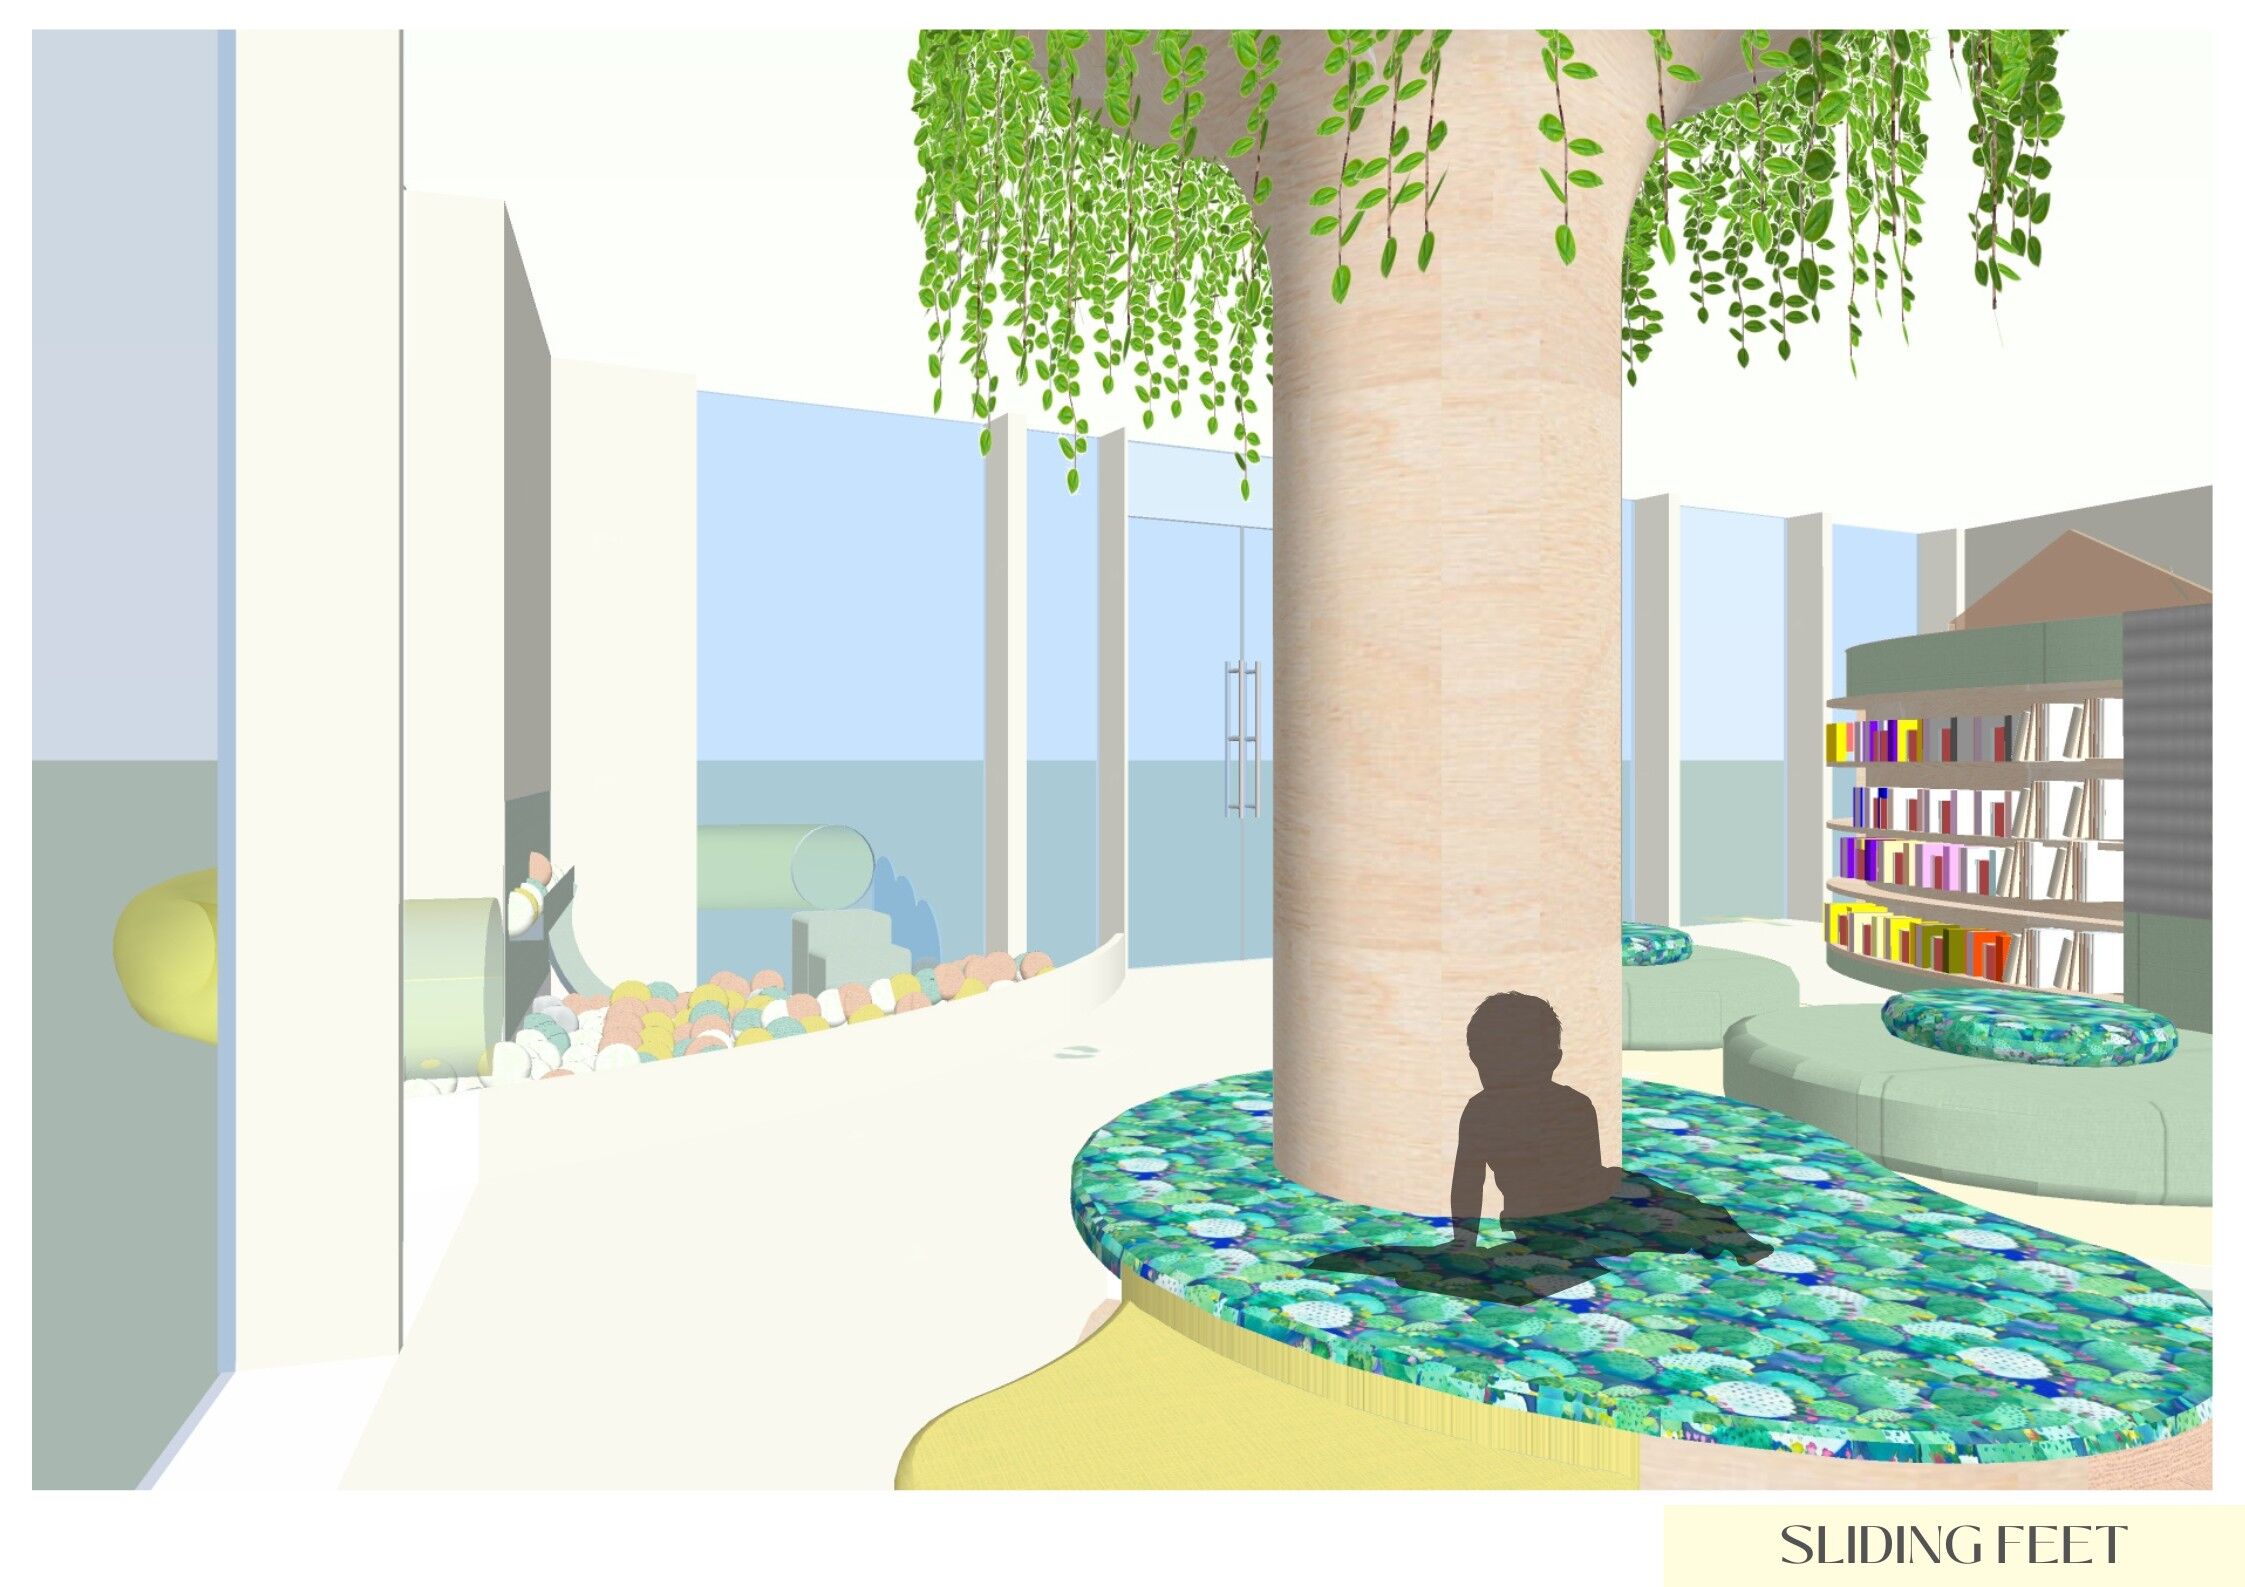 A conceptual design of a library with open, airy spaces, featuring a large tree, hanging greenery, and seating areas with a view of the sea.